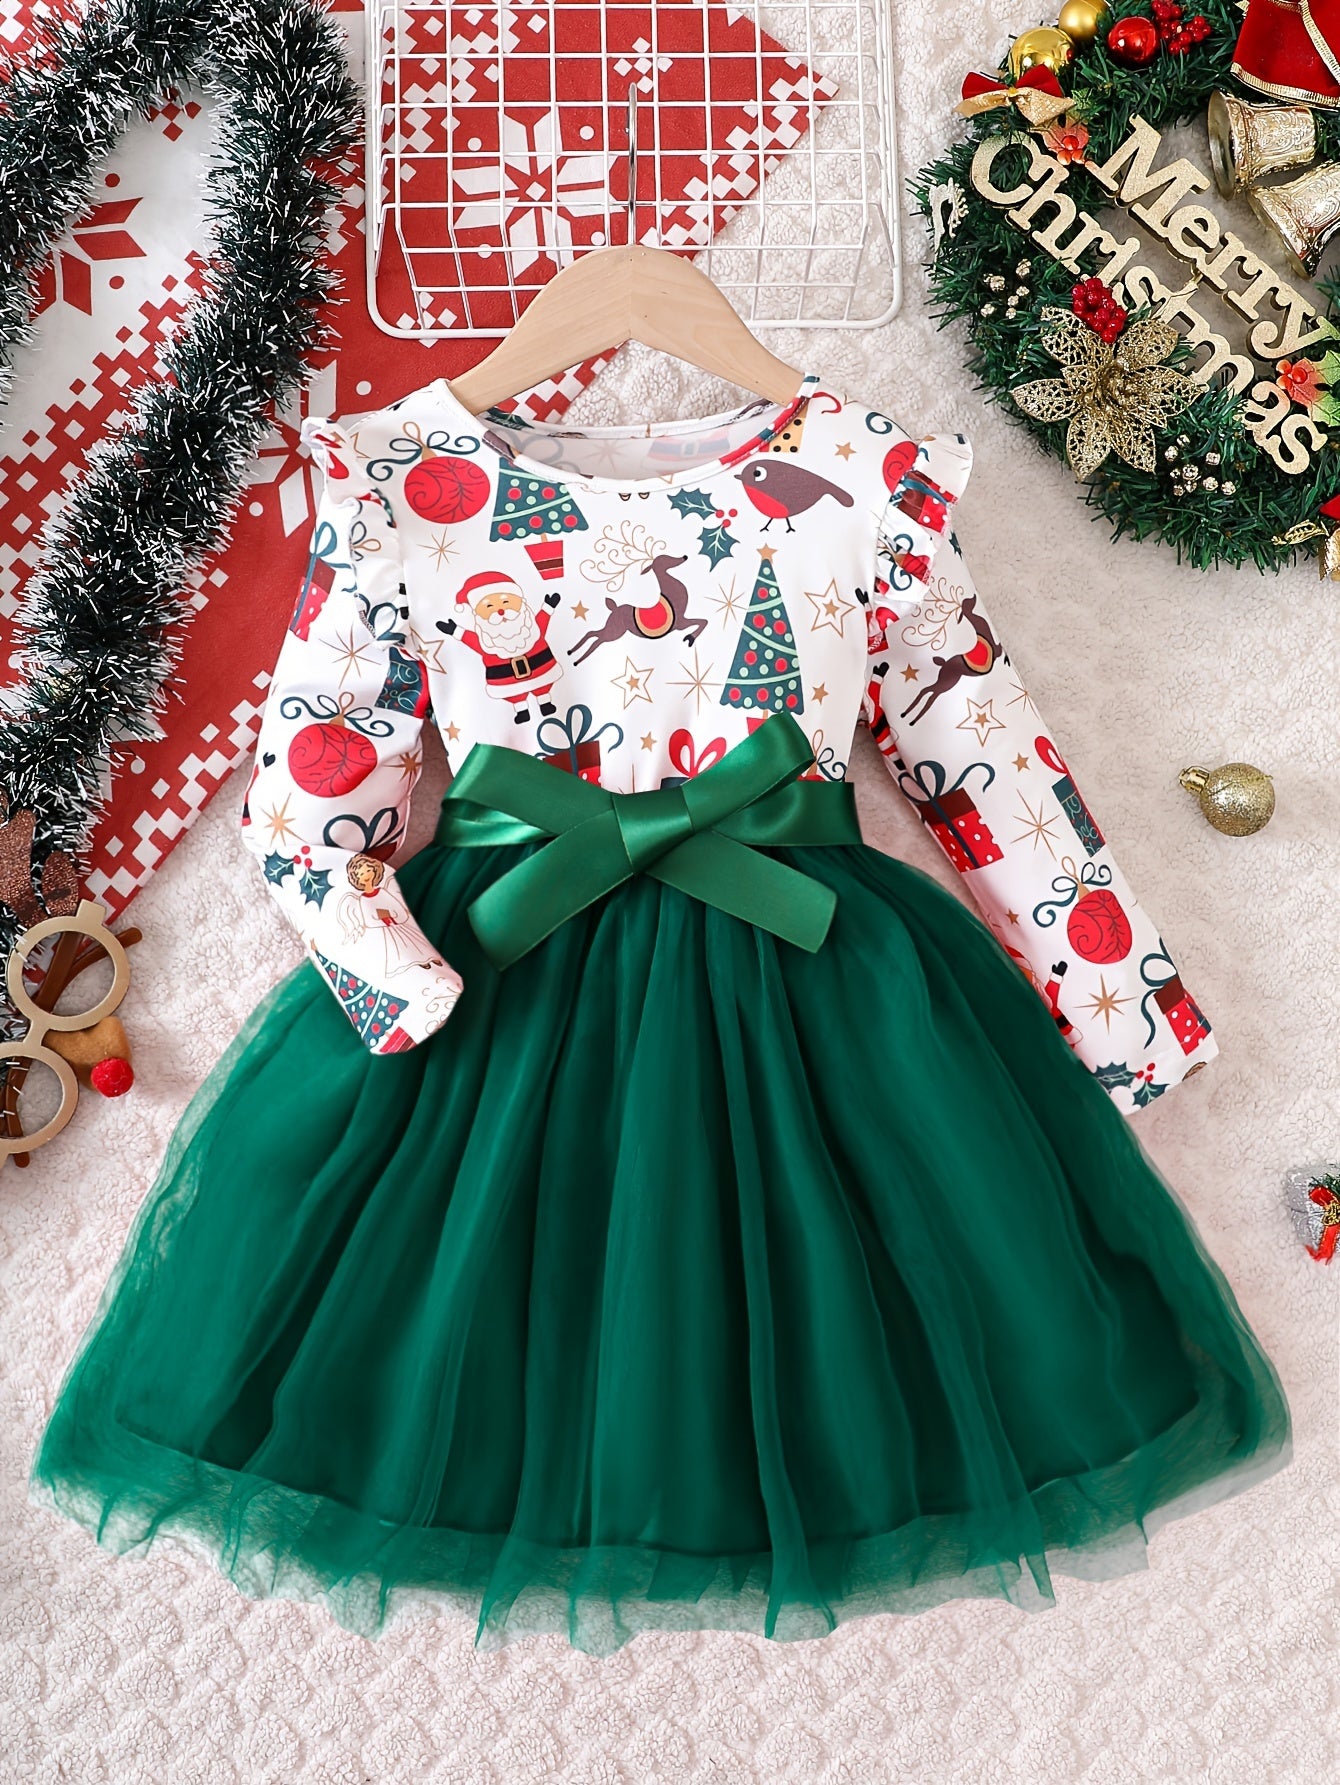 Christmas Girls Tulle Splice Long Sleeve Tutu Dress, Cute & Smart Holiday Party Dresses Outfit For Kids/ Toddlers, Gift Choice